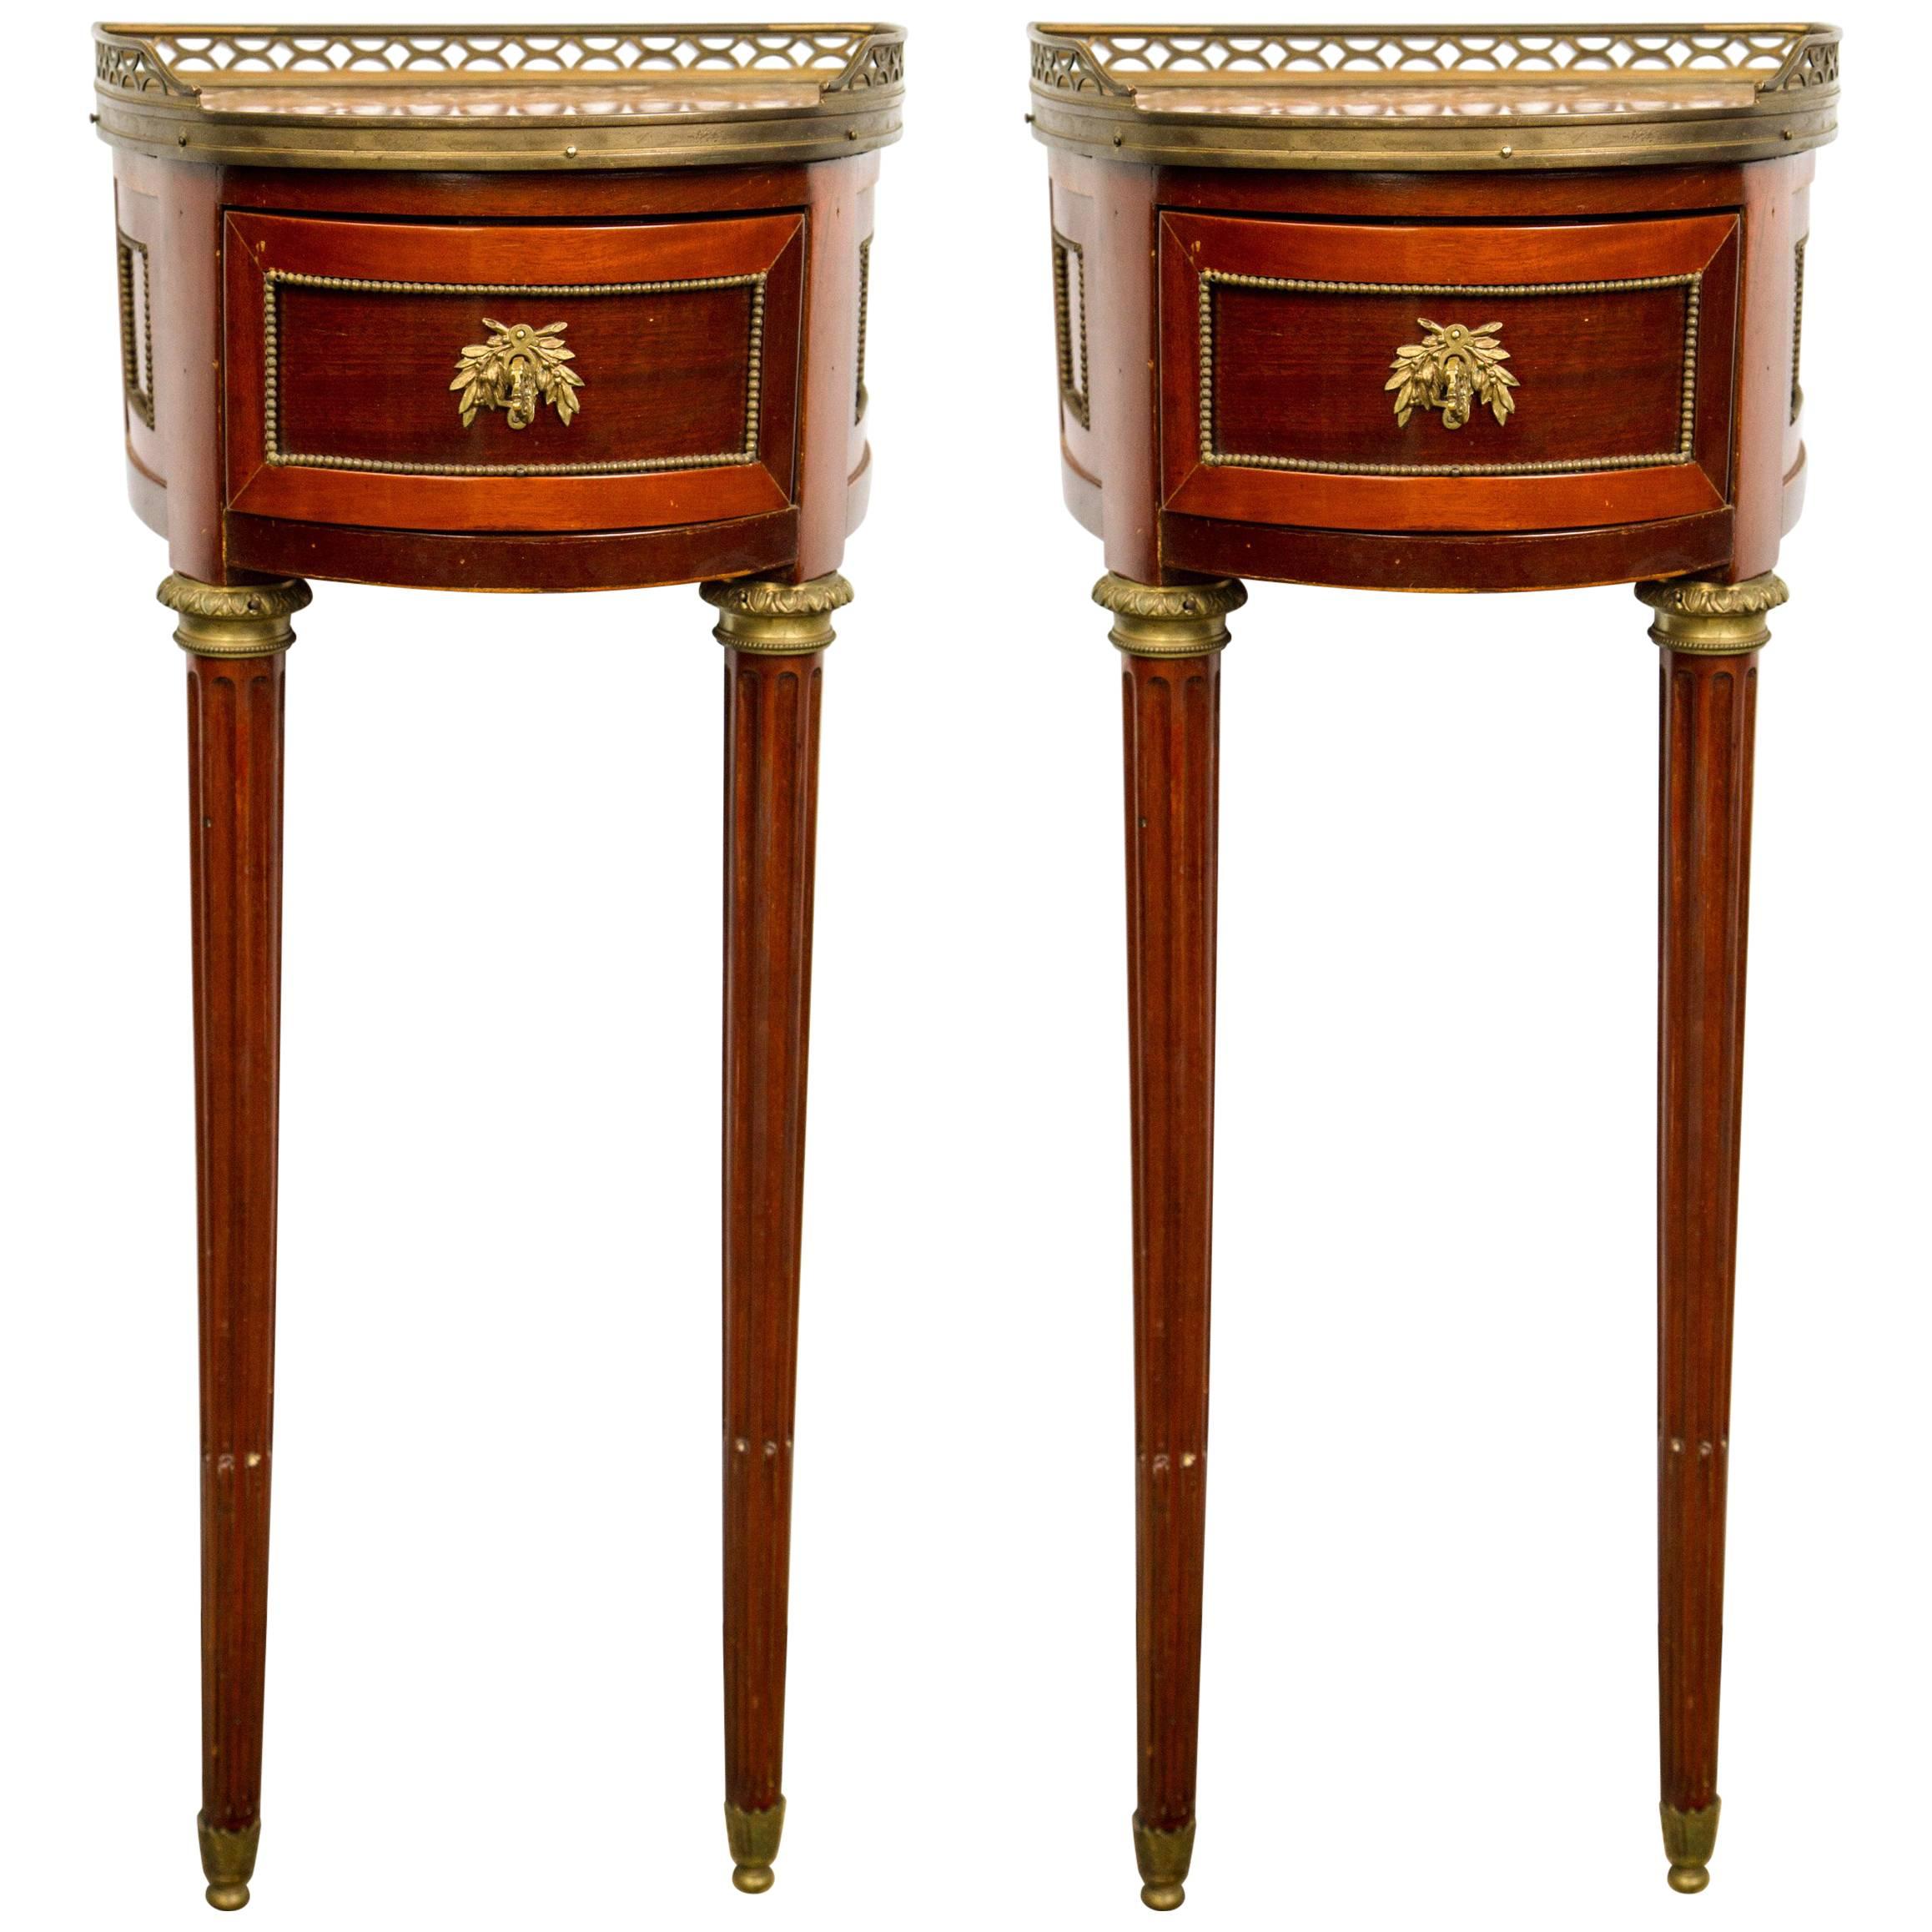 Pair of Small Wall-Mounted Louis XVI Period Consoles